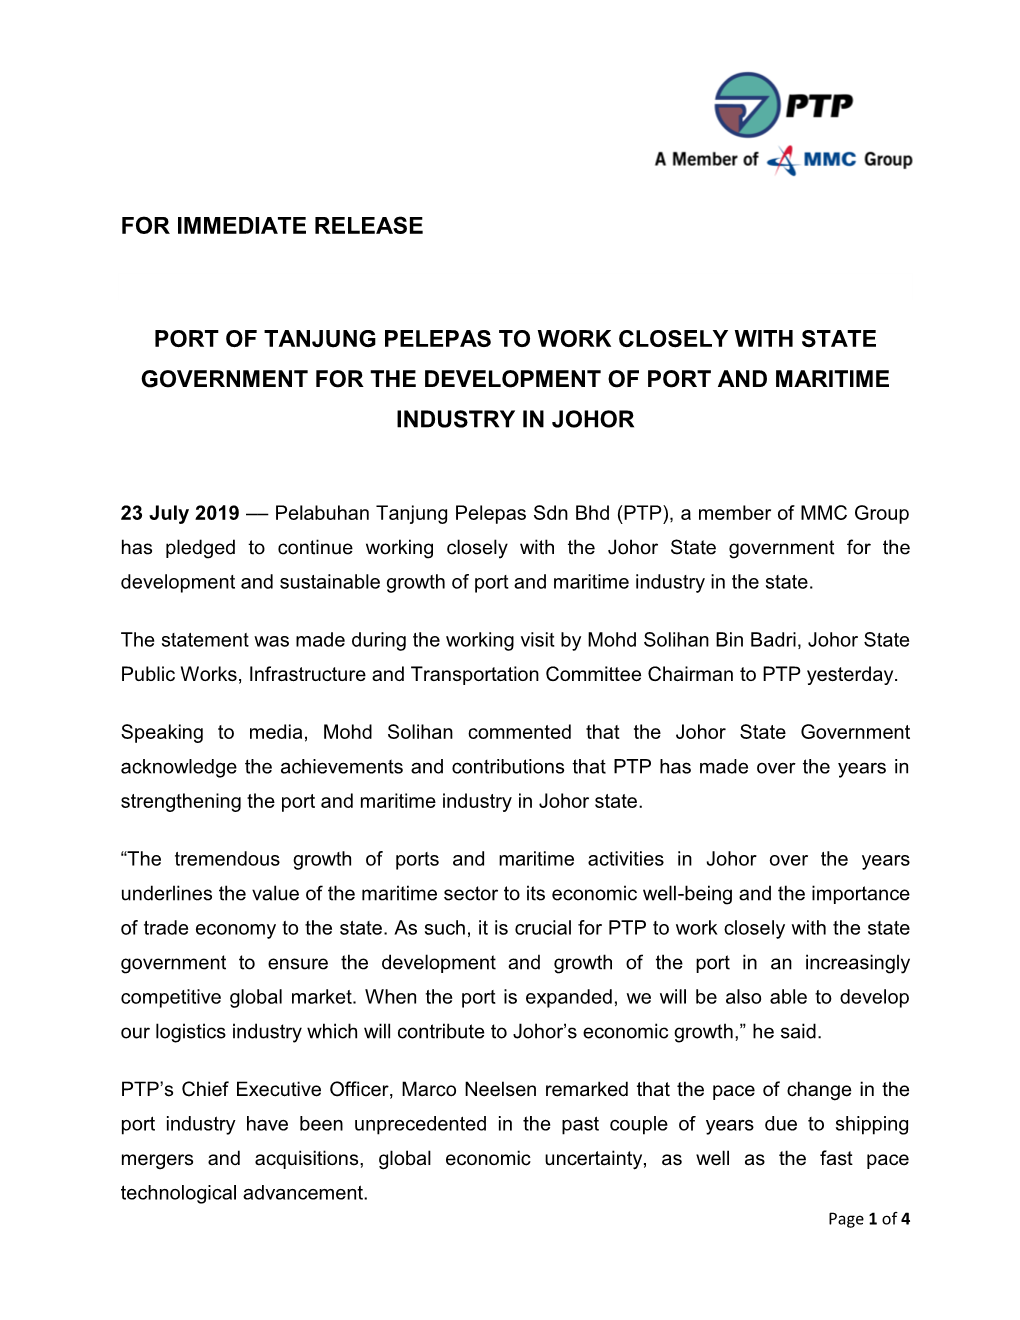 For Immediate Release Port of Tanjung Pelepas to Work